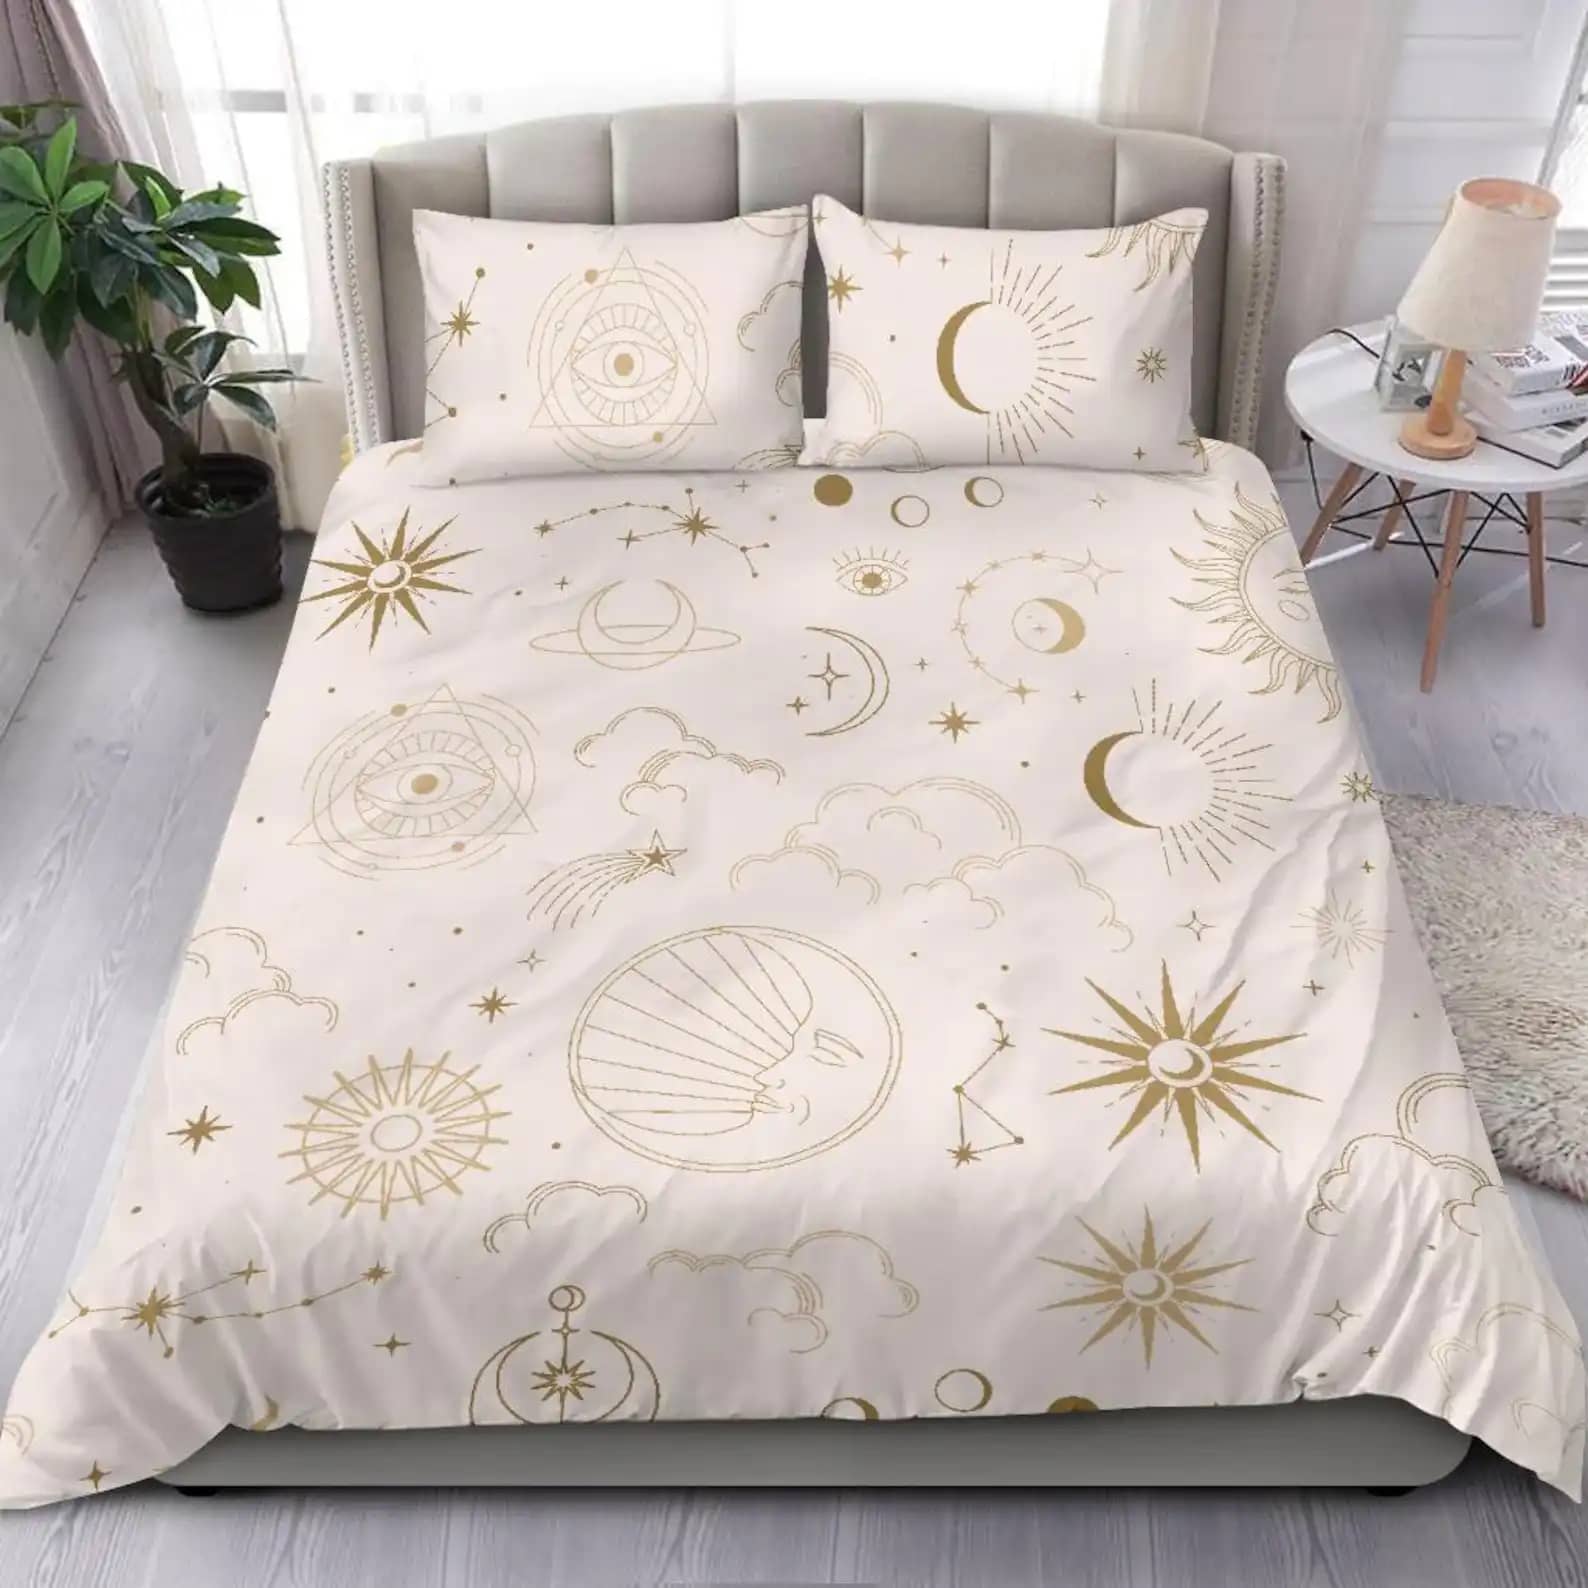 Perfect Bedding Set For Magical Nights Gold Sky Clouds And Constellation On A White Background Quilt Bedding Sets